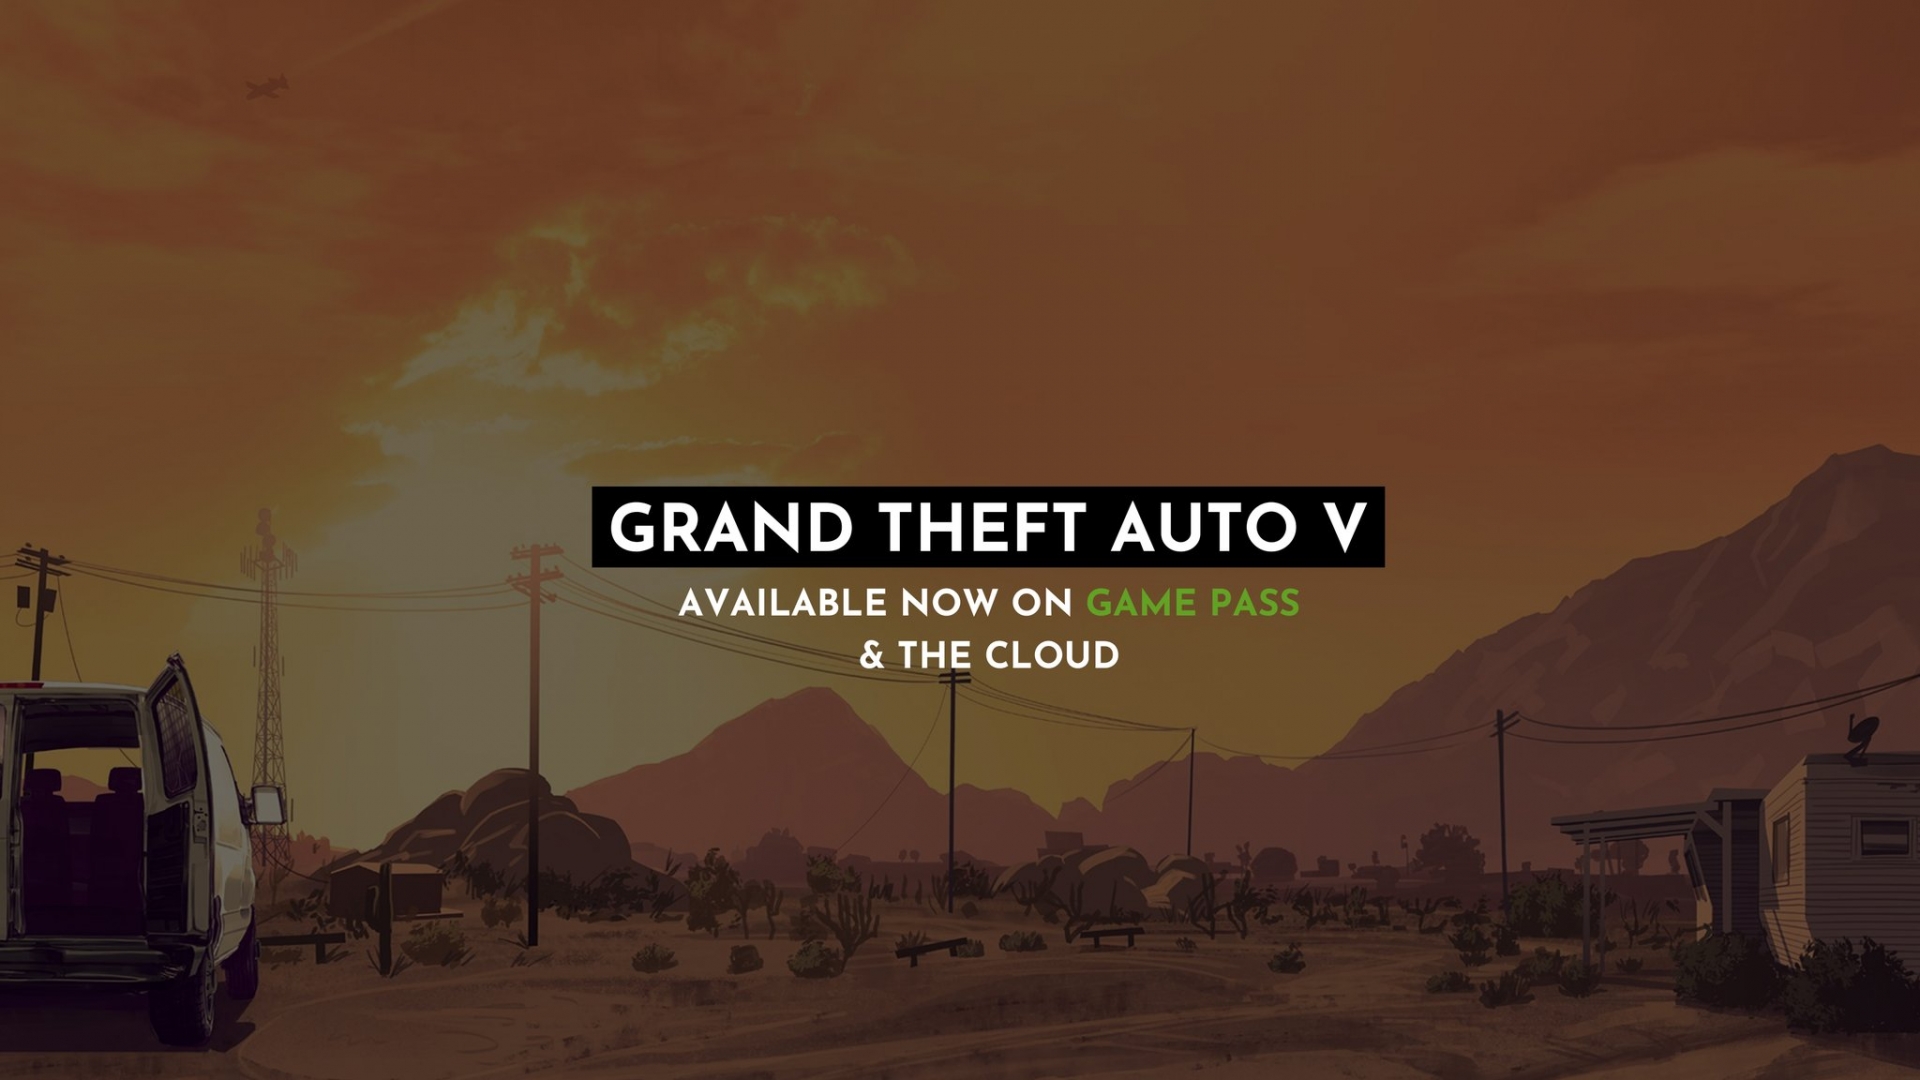 Grand Theft Auto 5 in Mobile: Download, How & Tips to Play and Purchase